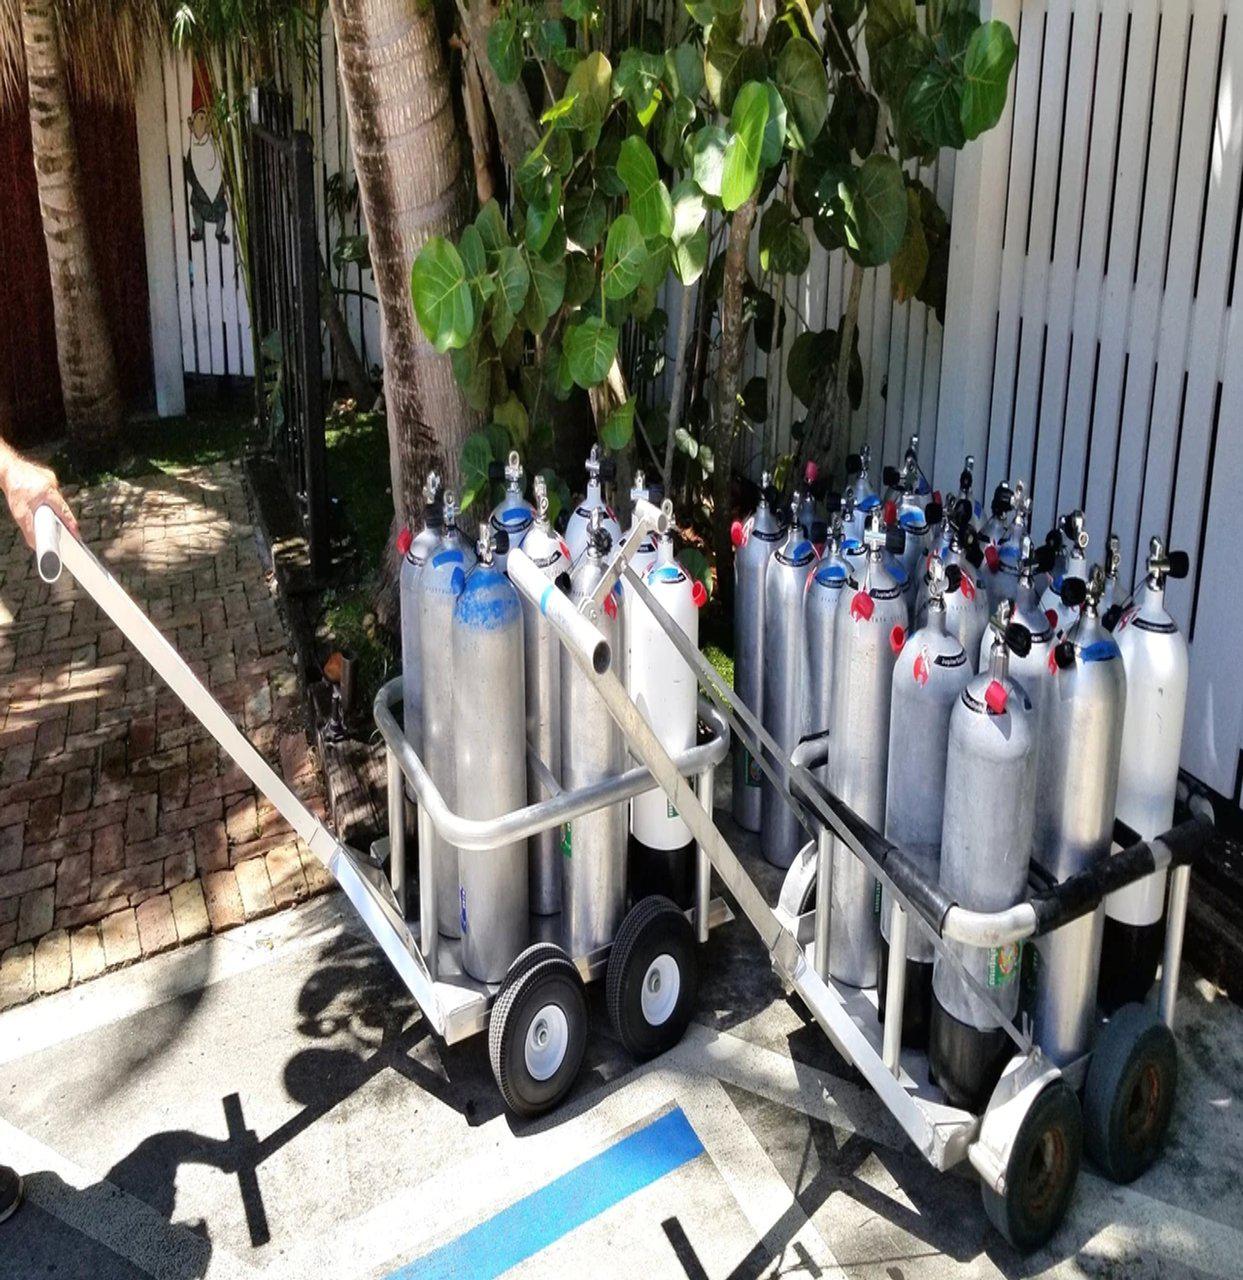 Alumacart Scuba Niner Package-Hauls NINE Dive Tanks - LEAD TIME TO SHIP 10 TO 12 BUSINESS DAYS